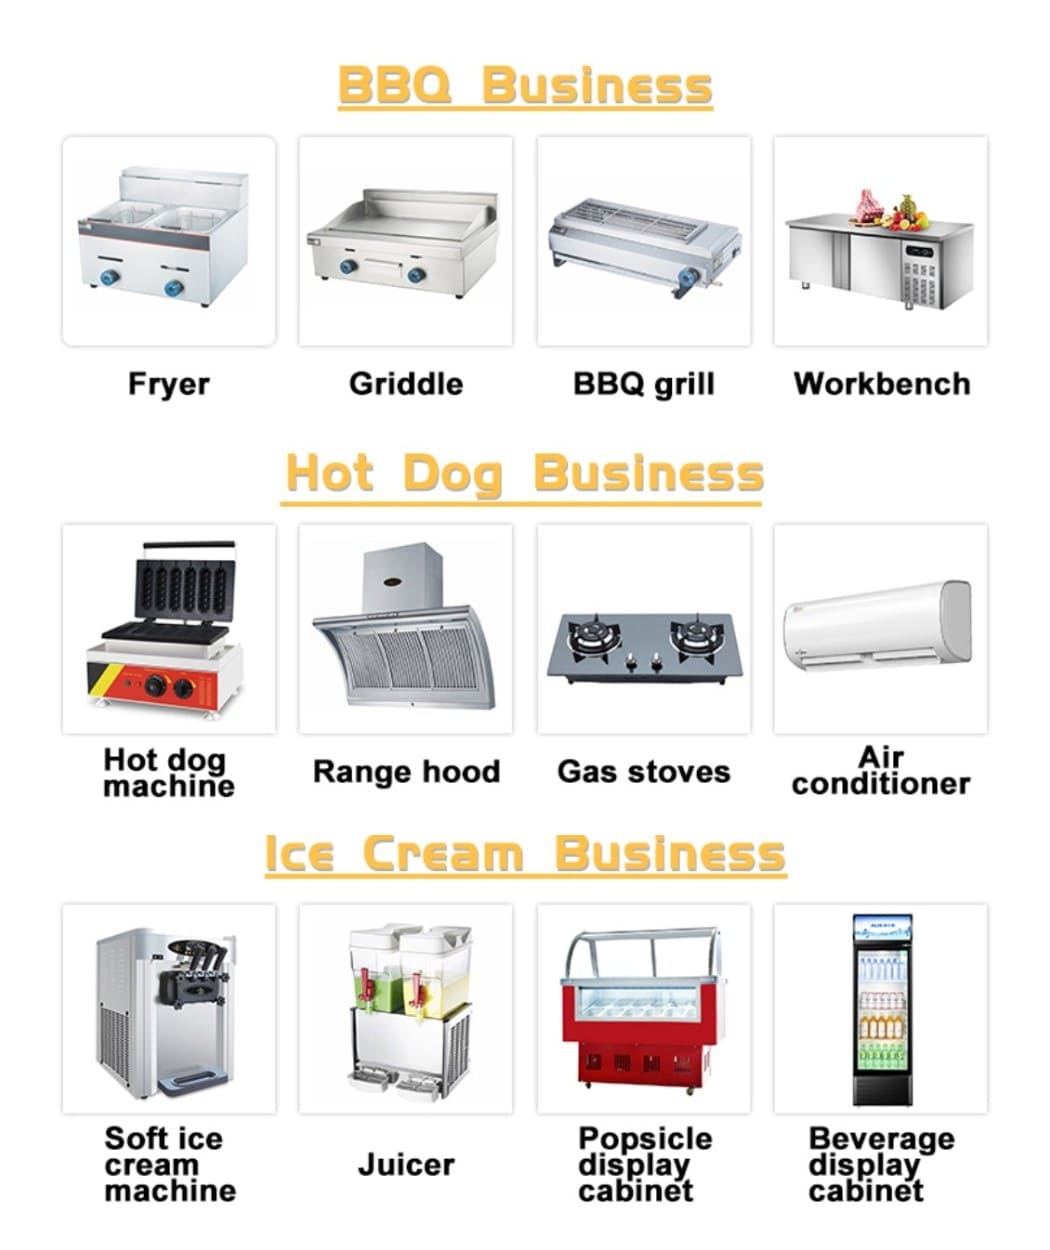 https://www.etofoodcarts.com/d/images/Blog/How-to-Choose-the-Right-Kitchen-Equipment-for-a-Food-Trailer/kitchen%20equipment%20for%20enclosed%20food%20trailers.jpg